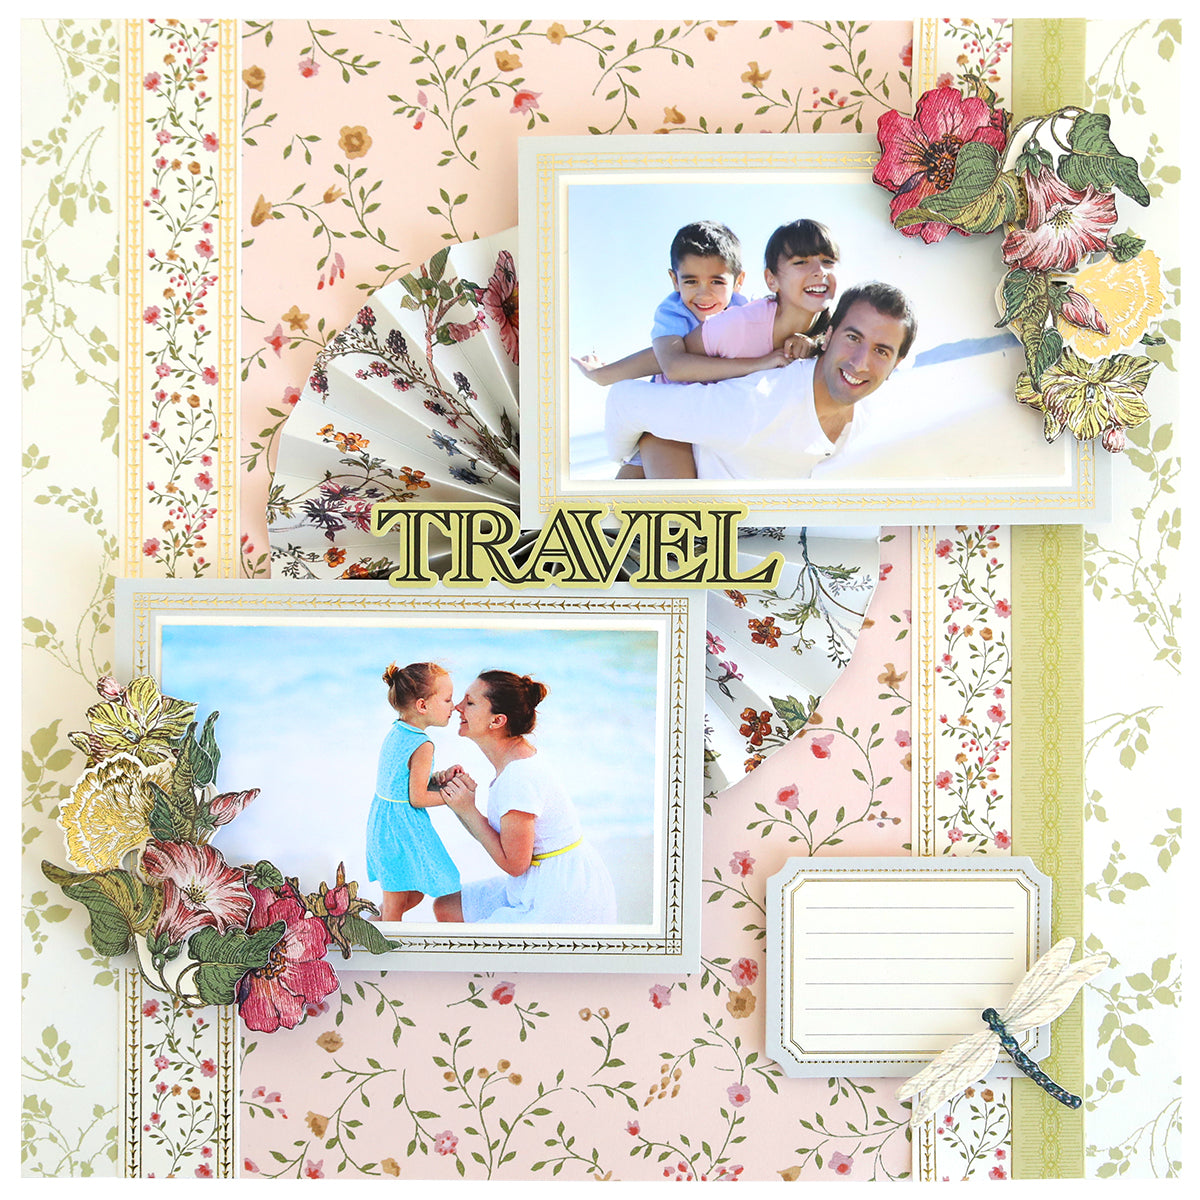 Simply Wildflower Meadow Scrapbook Kit album page with two family photos, floral decorations from the Wildflower Meadow collection, and the word "travel"; includes a tag and a patterned background.